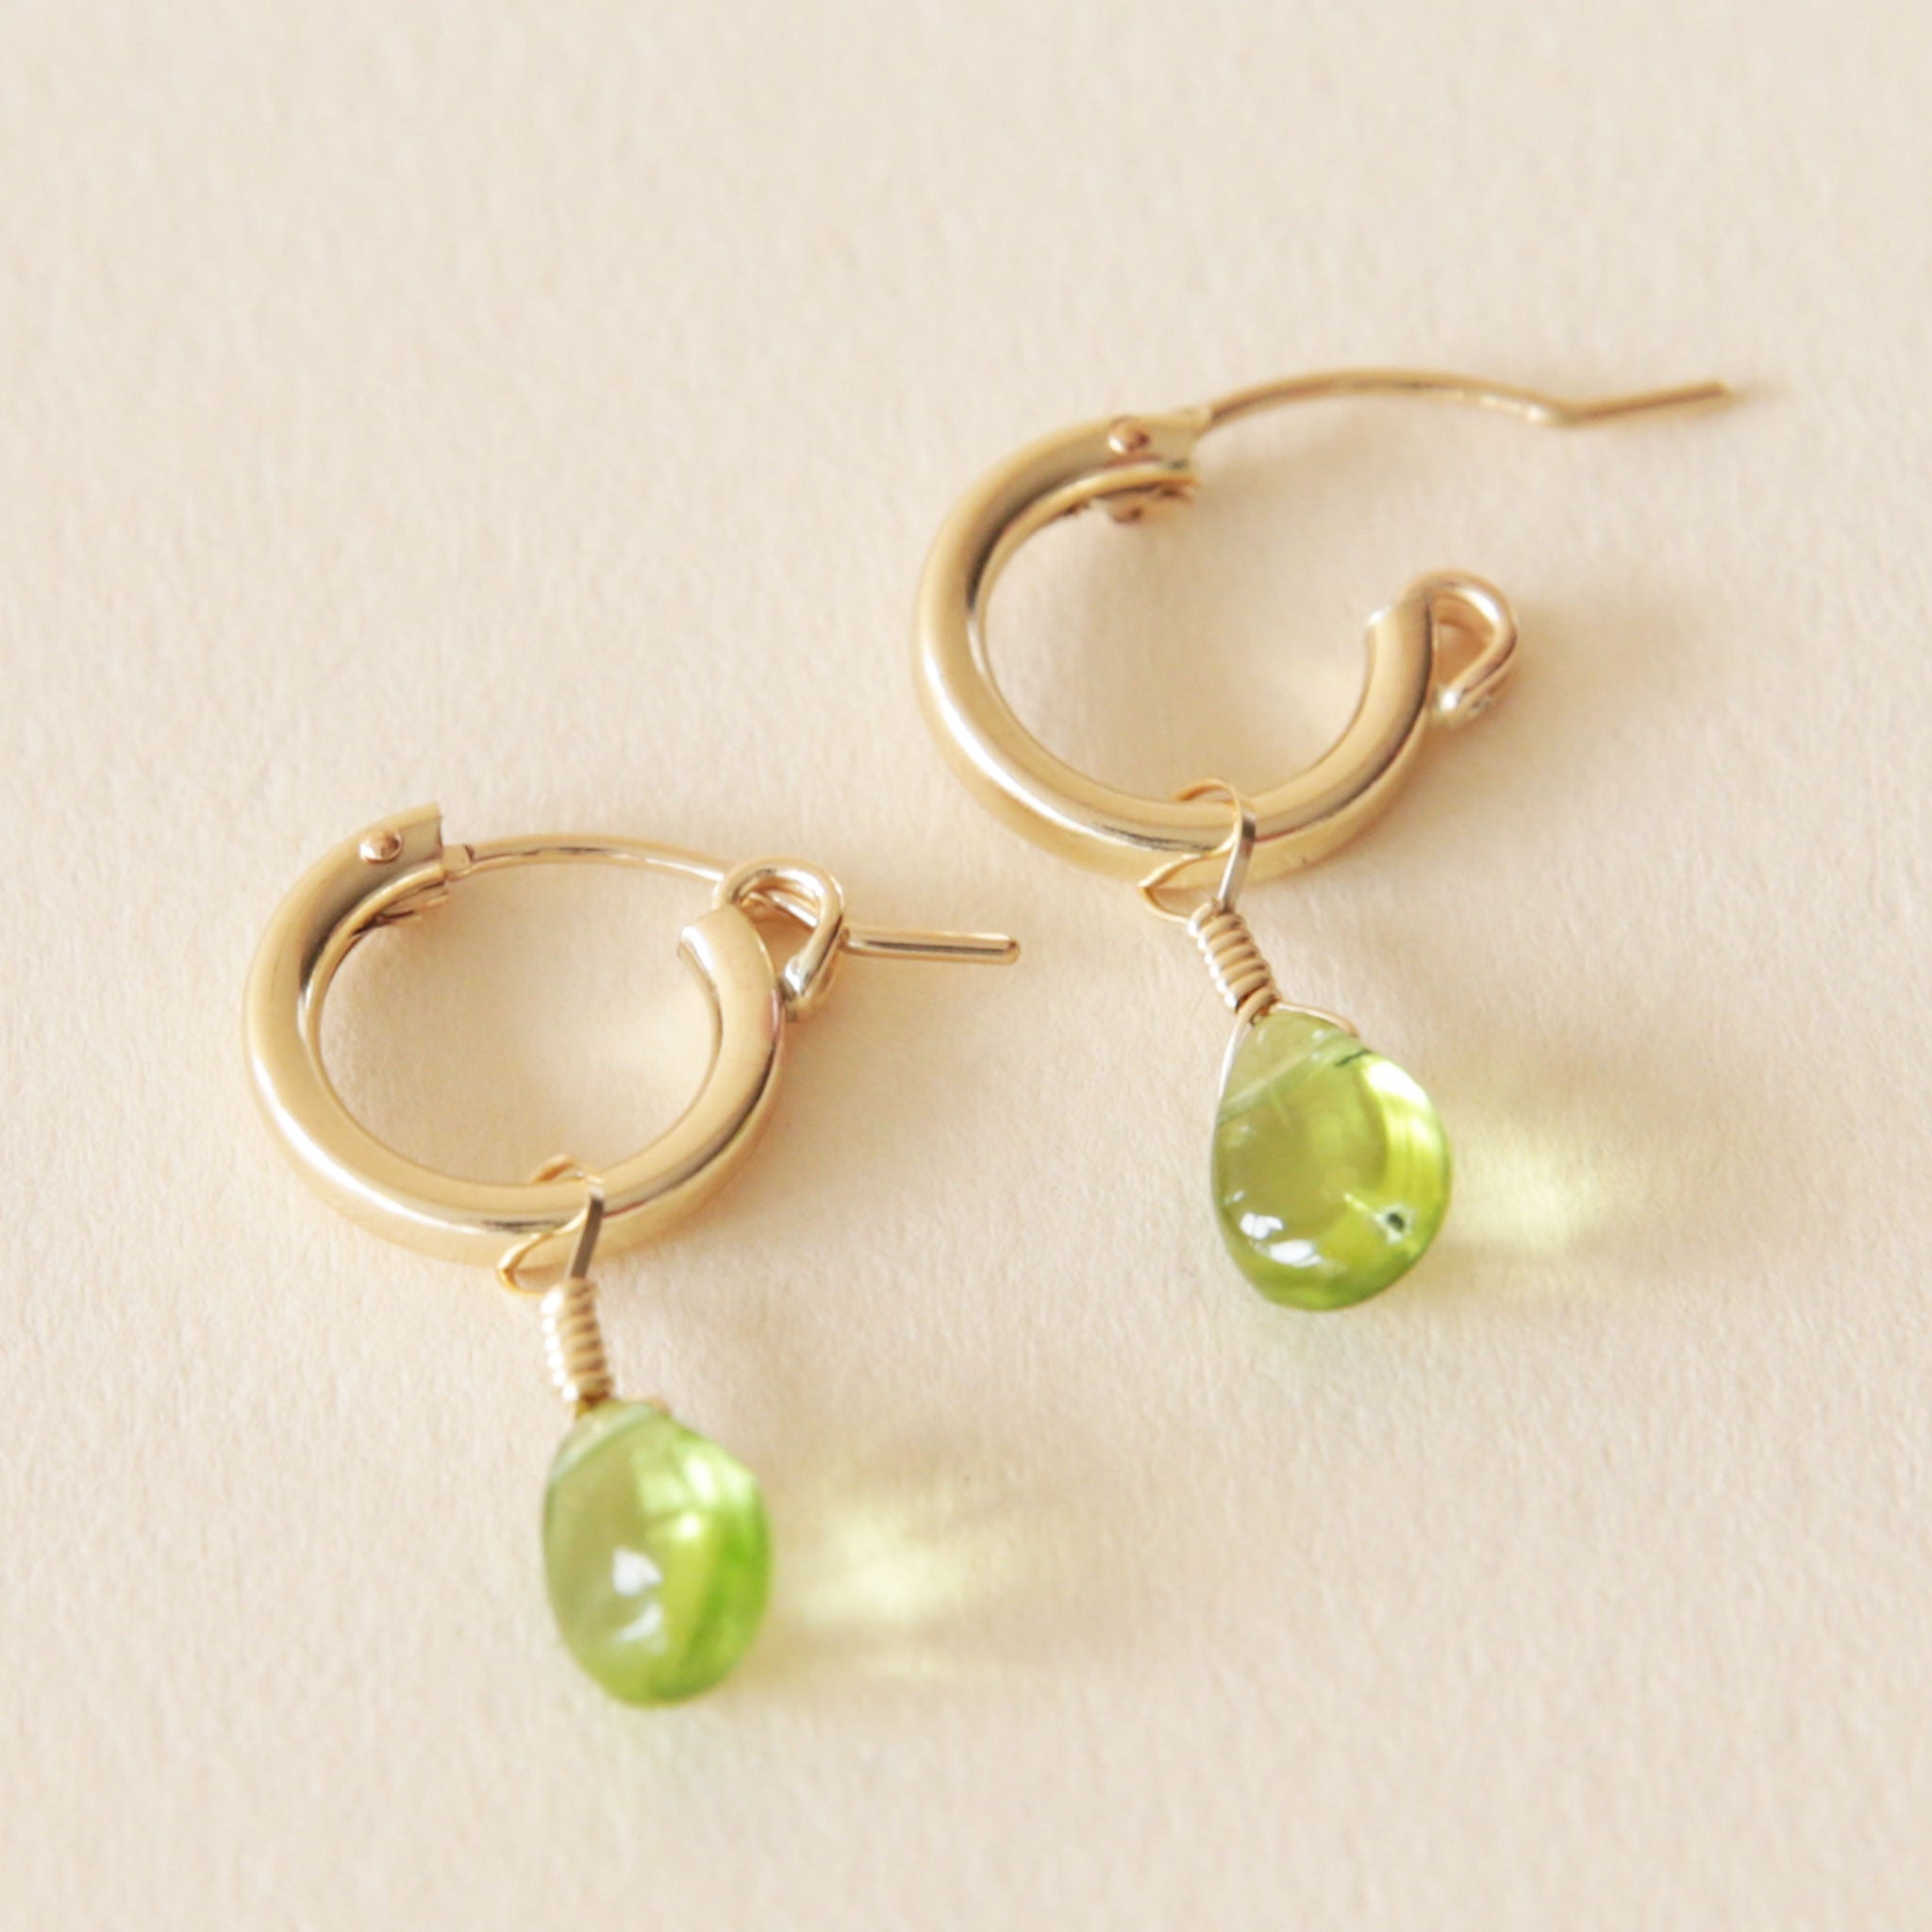 On a neutral background is a gold pair of hoop earrings with a green Peridot drop detail.